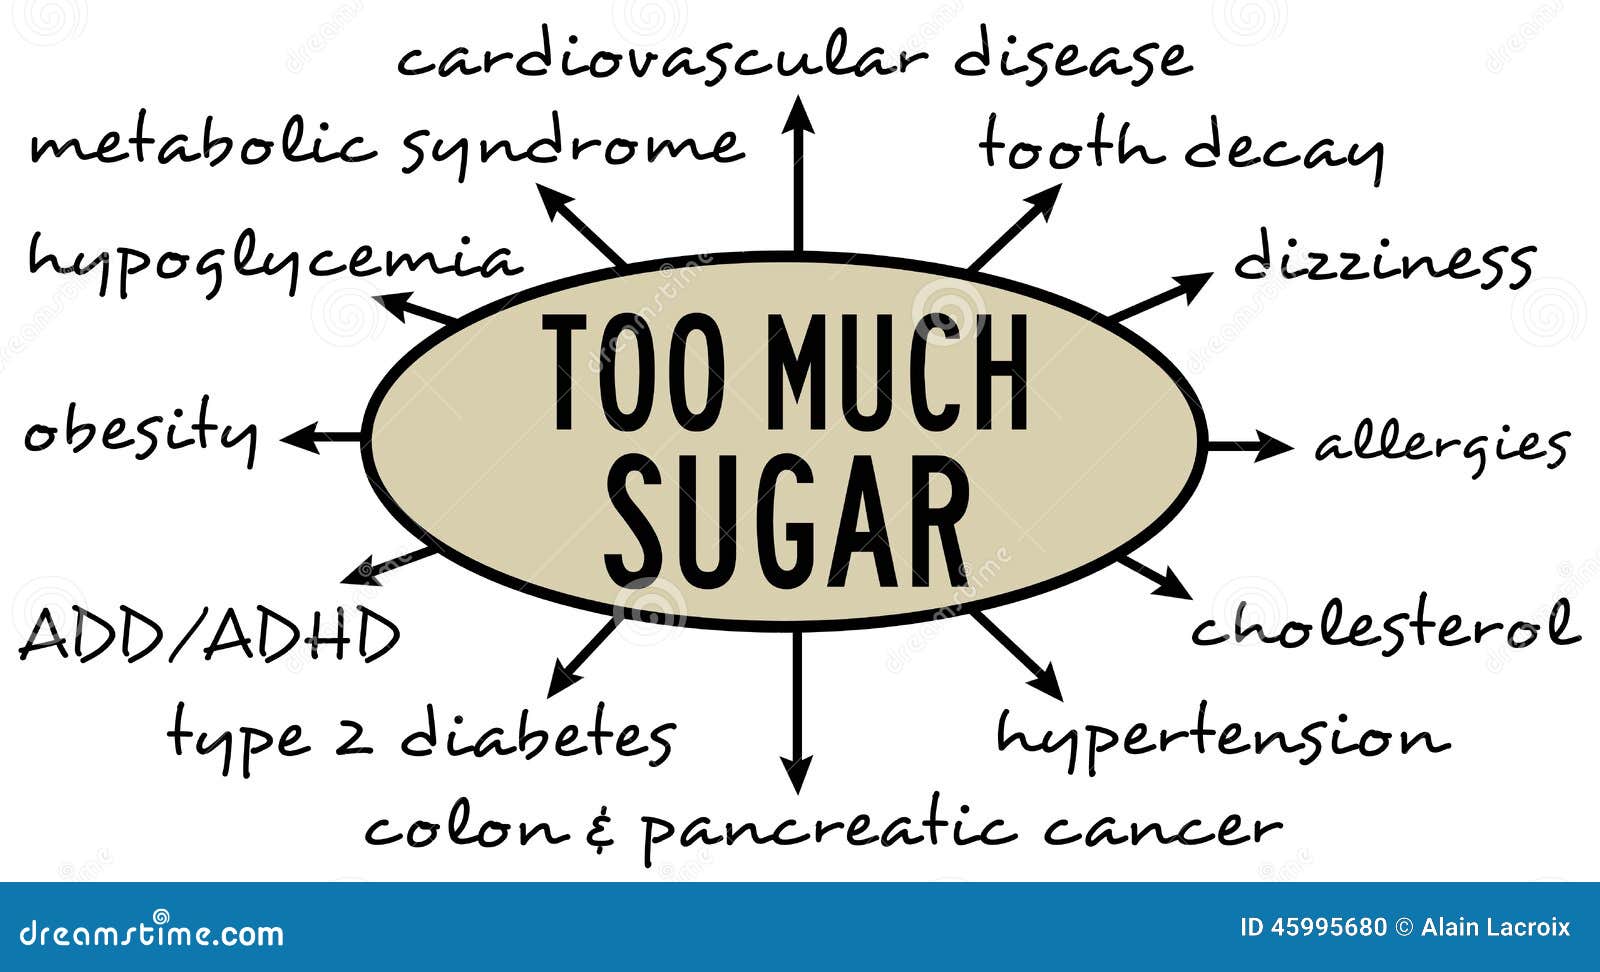 Effects of excessive sugar consumption